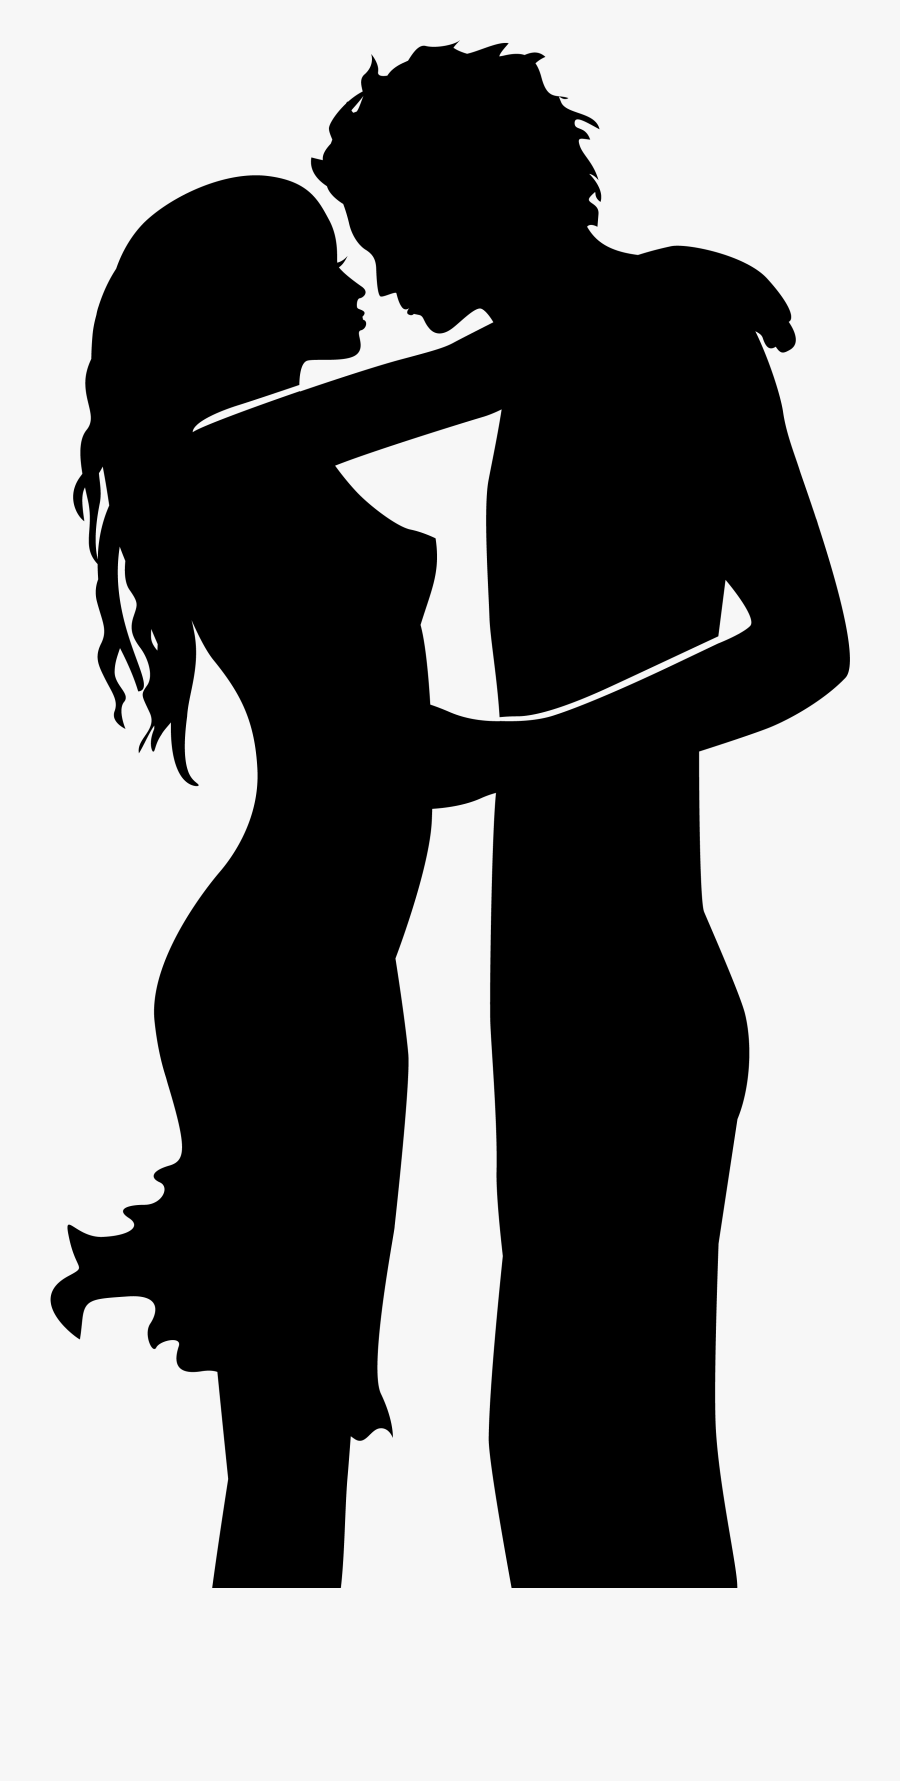 Valentine Man And Woman Silhouettes Png Picture - Love Gif Facebook Cover, Transparent Clipart